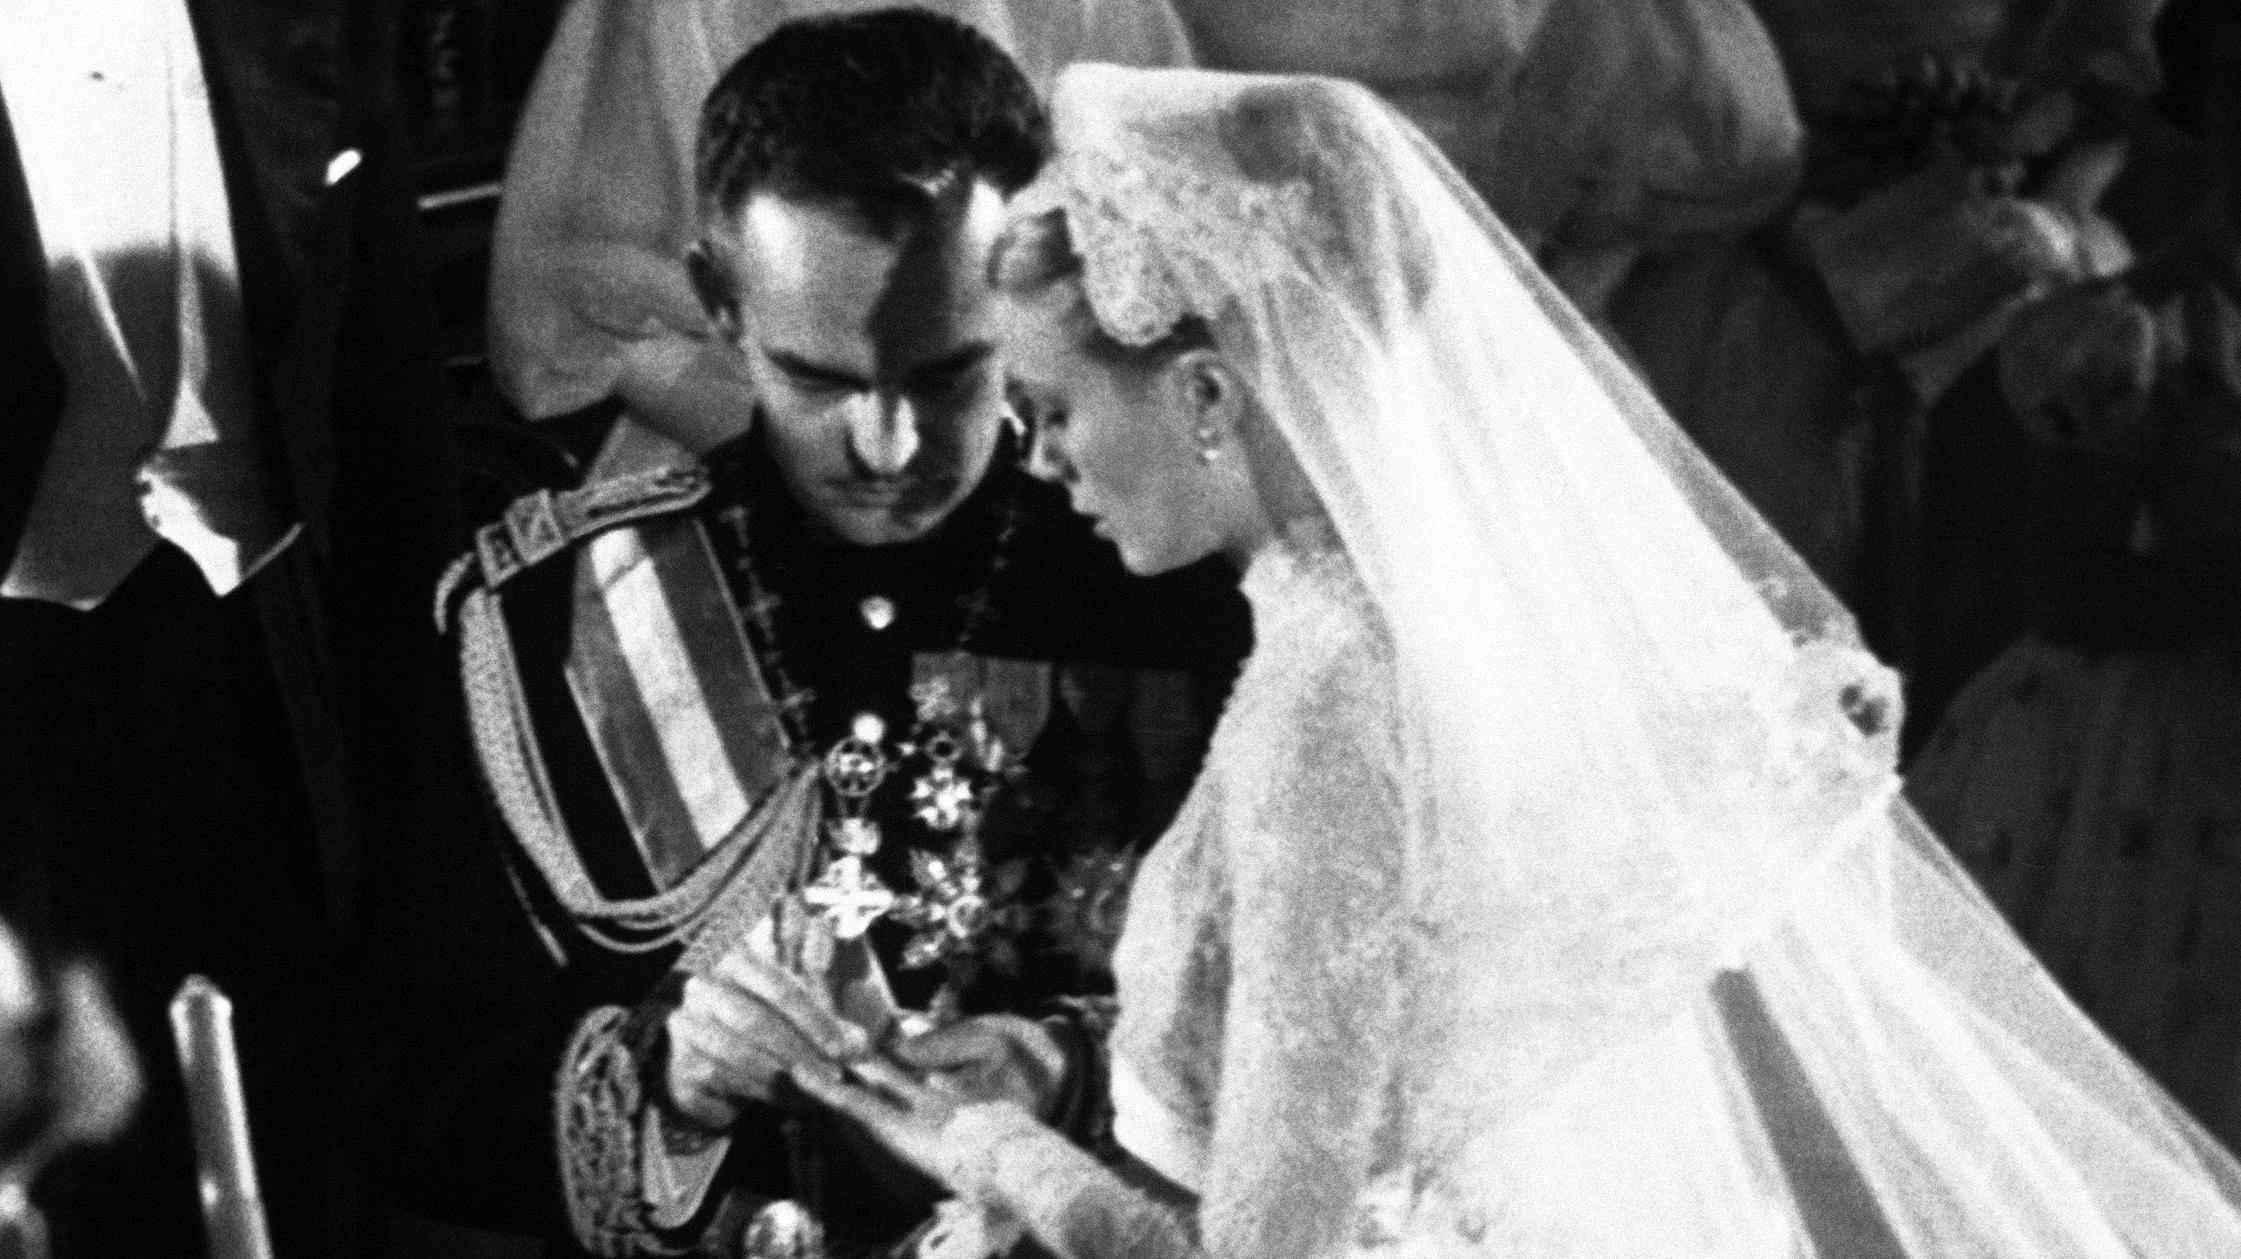 FILE - In this April 19, 1956 file photo, Prince Rainier places the ring on Grace Kelly's finger during their wedding ceremony in Monaco. Kelly retired from acting at 26 to become his princess, decamping to the tiny, well-heeled Mediterranean principality on the Riviera. (AP Photo, File)
